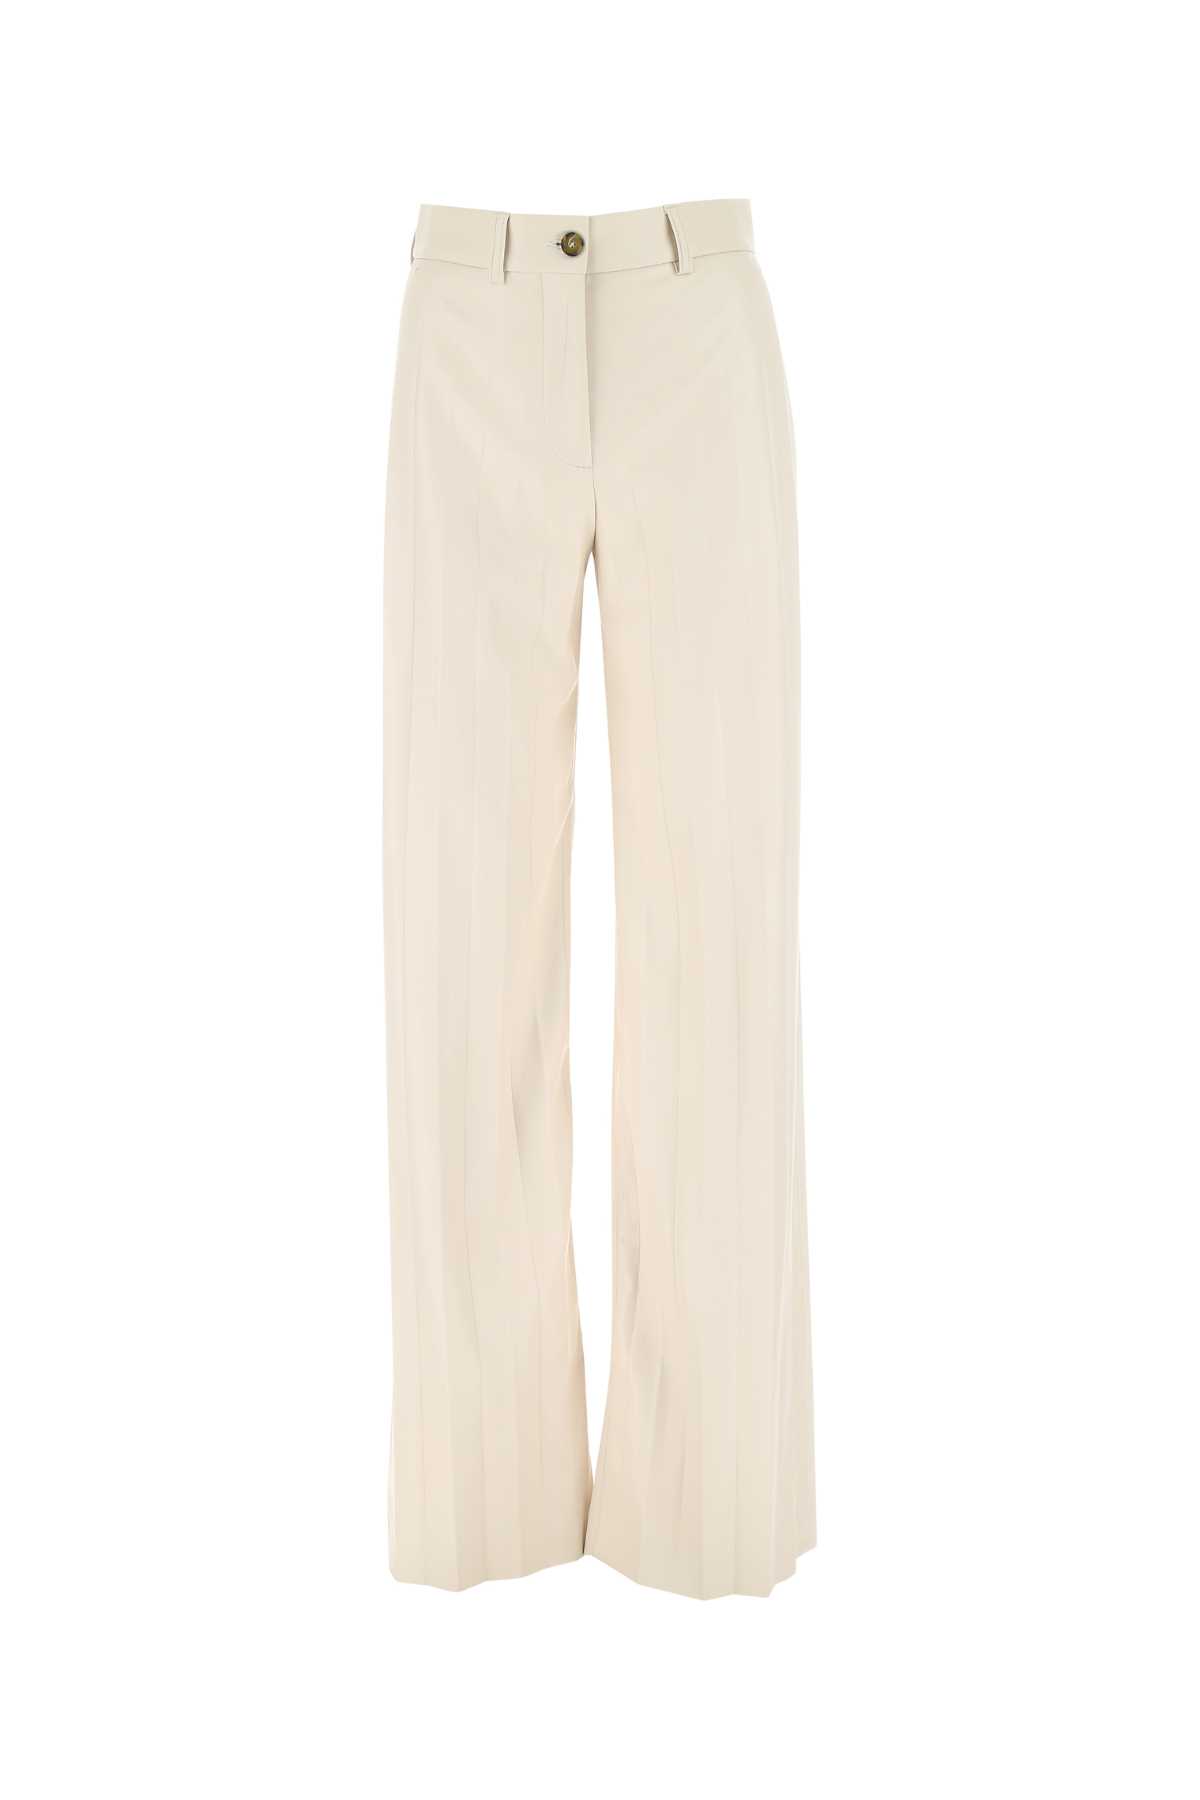 Ivory Synthetic Leather Pant